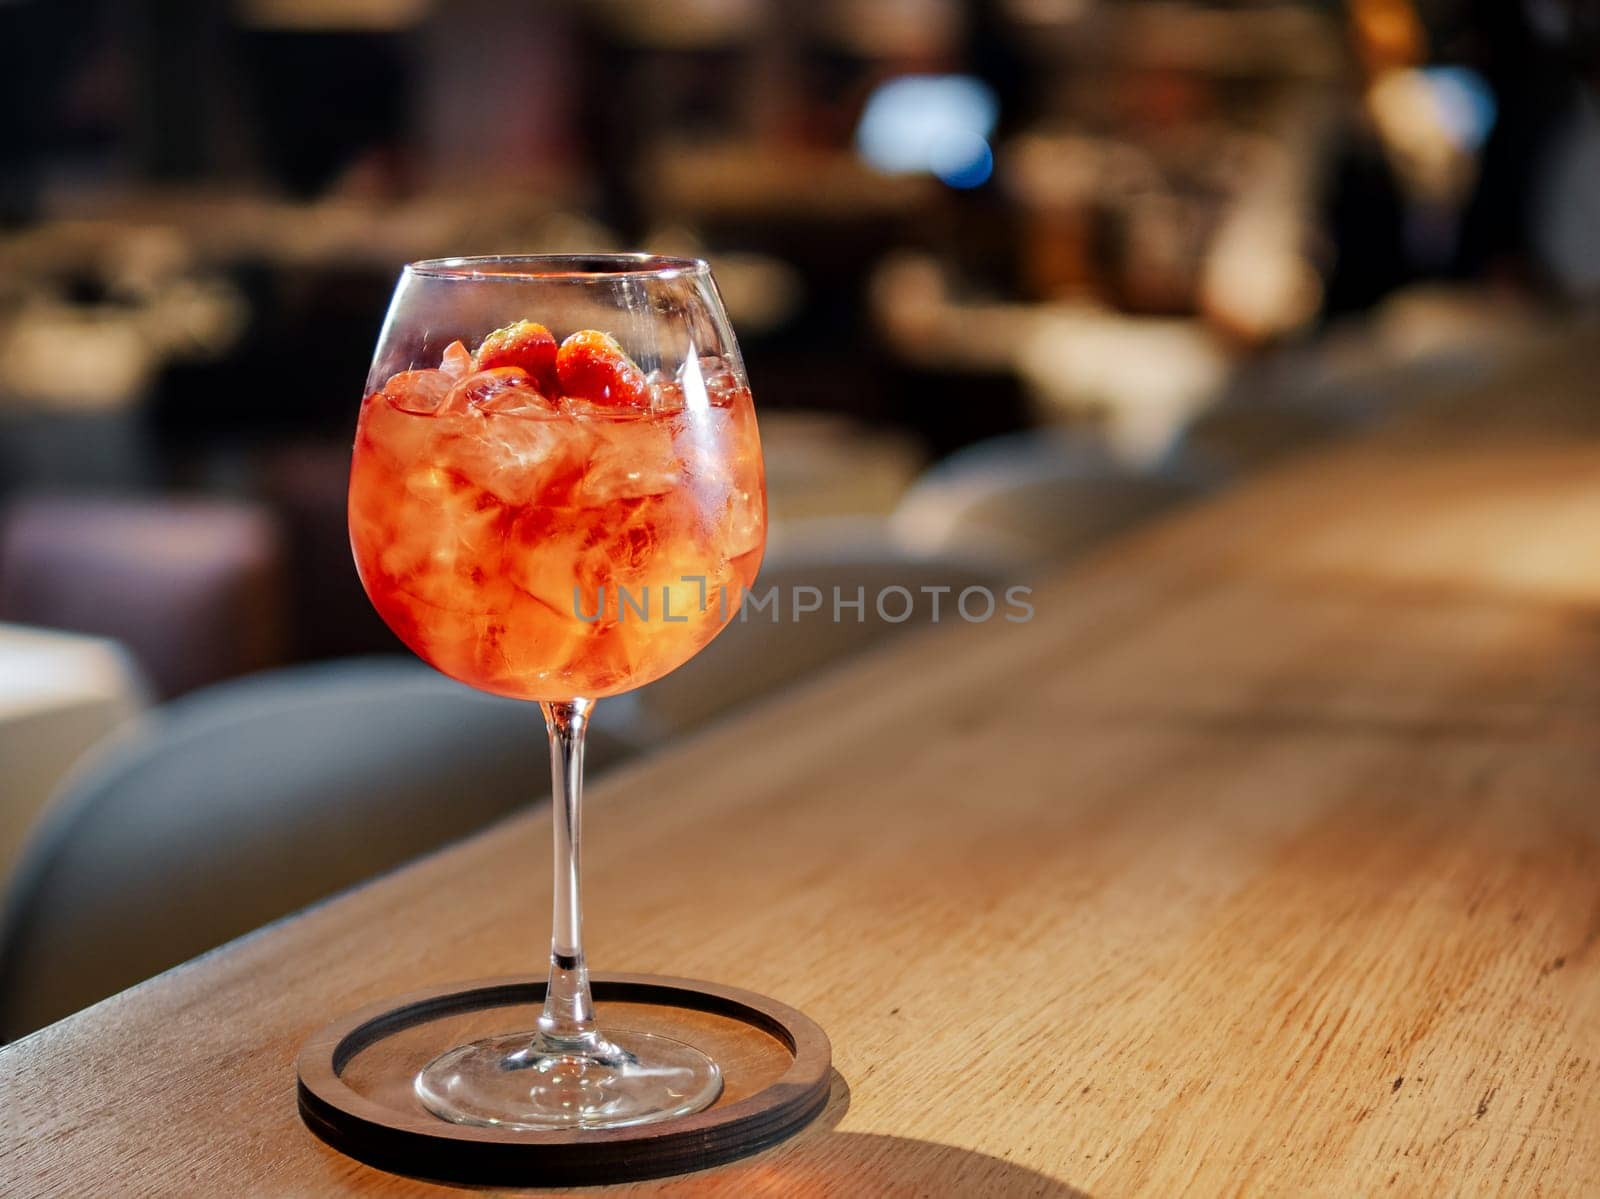 Transparent pink alcohol cocktail in wine glass with ice, aperol and gin on bar counter in restaurant interior. Alcohol drink Aperol Spritz aperitif cocktail. Cold alcoholic cocktail in bar or nightclub. Copy space